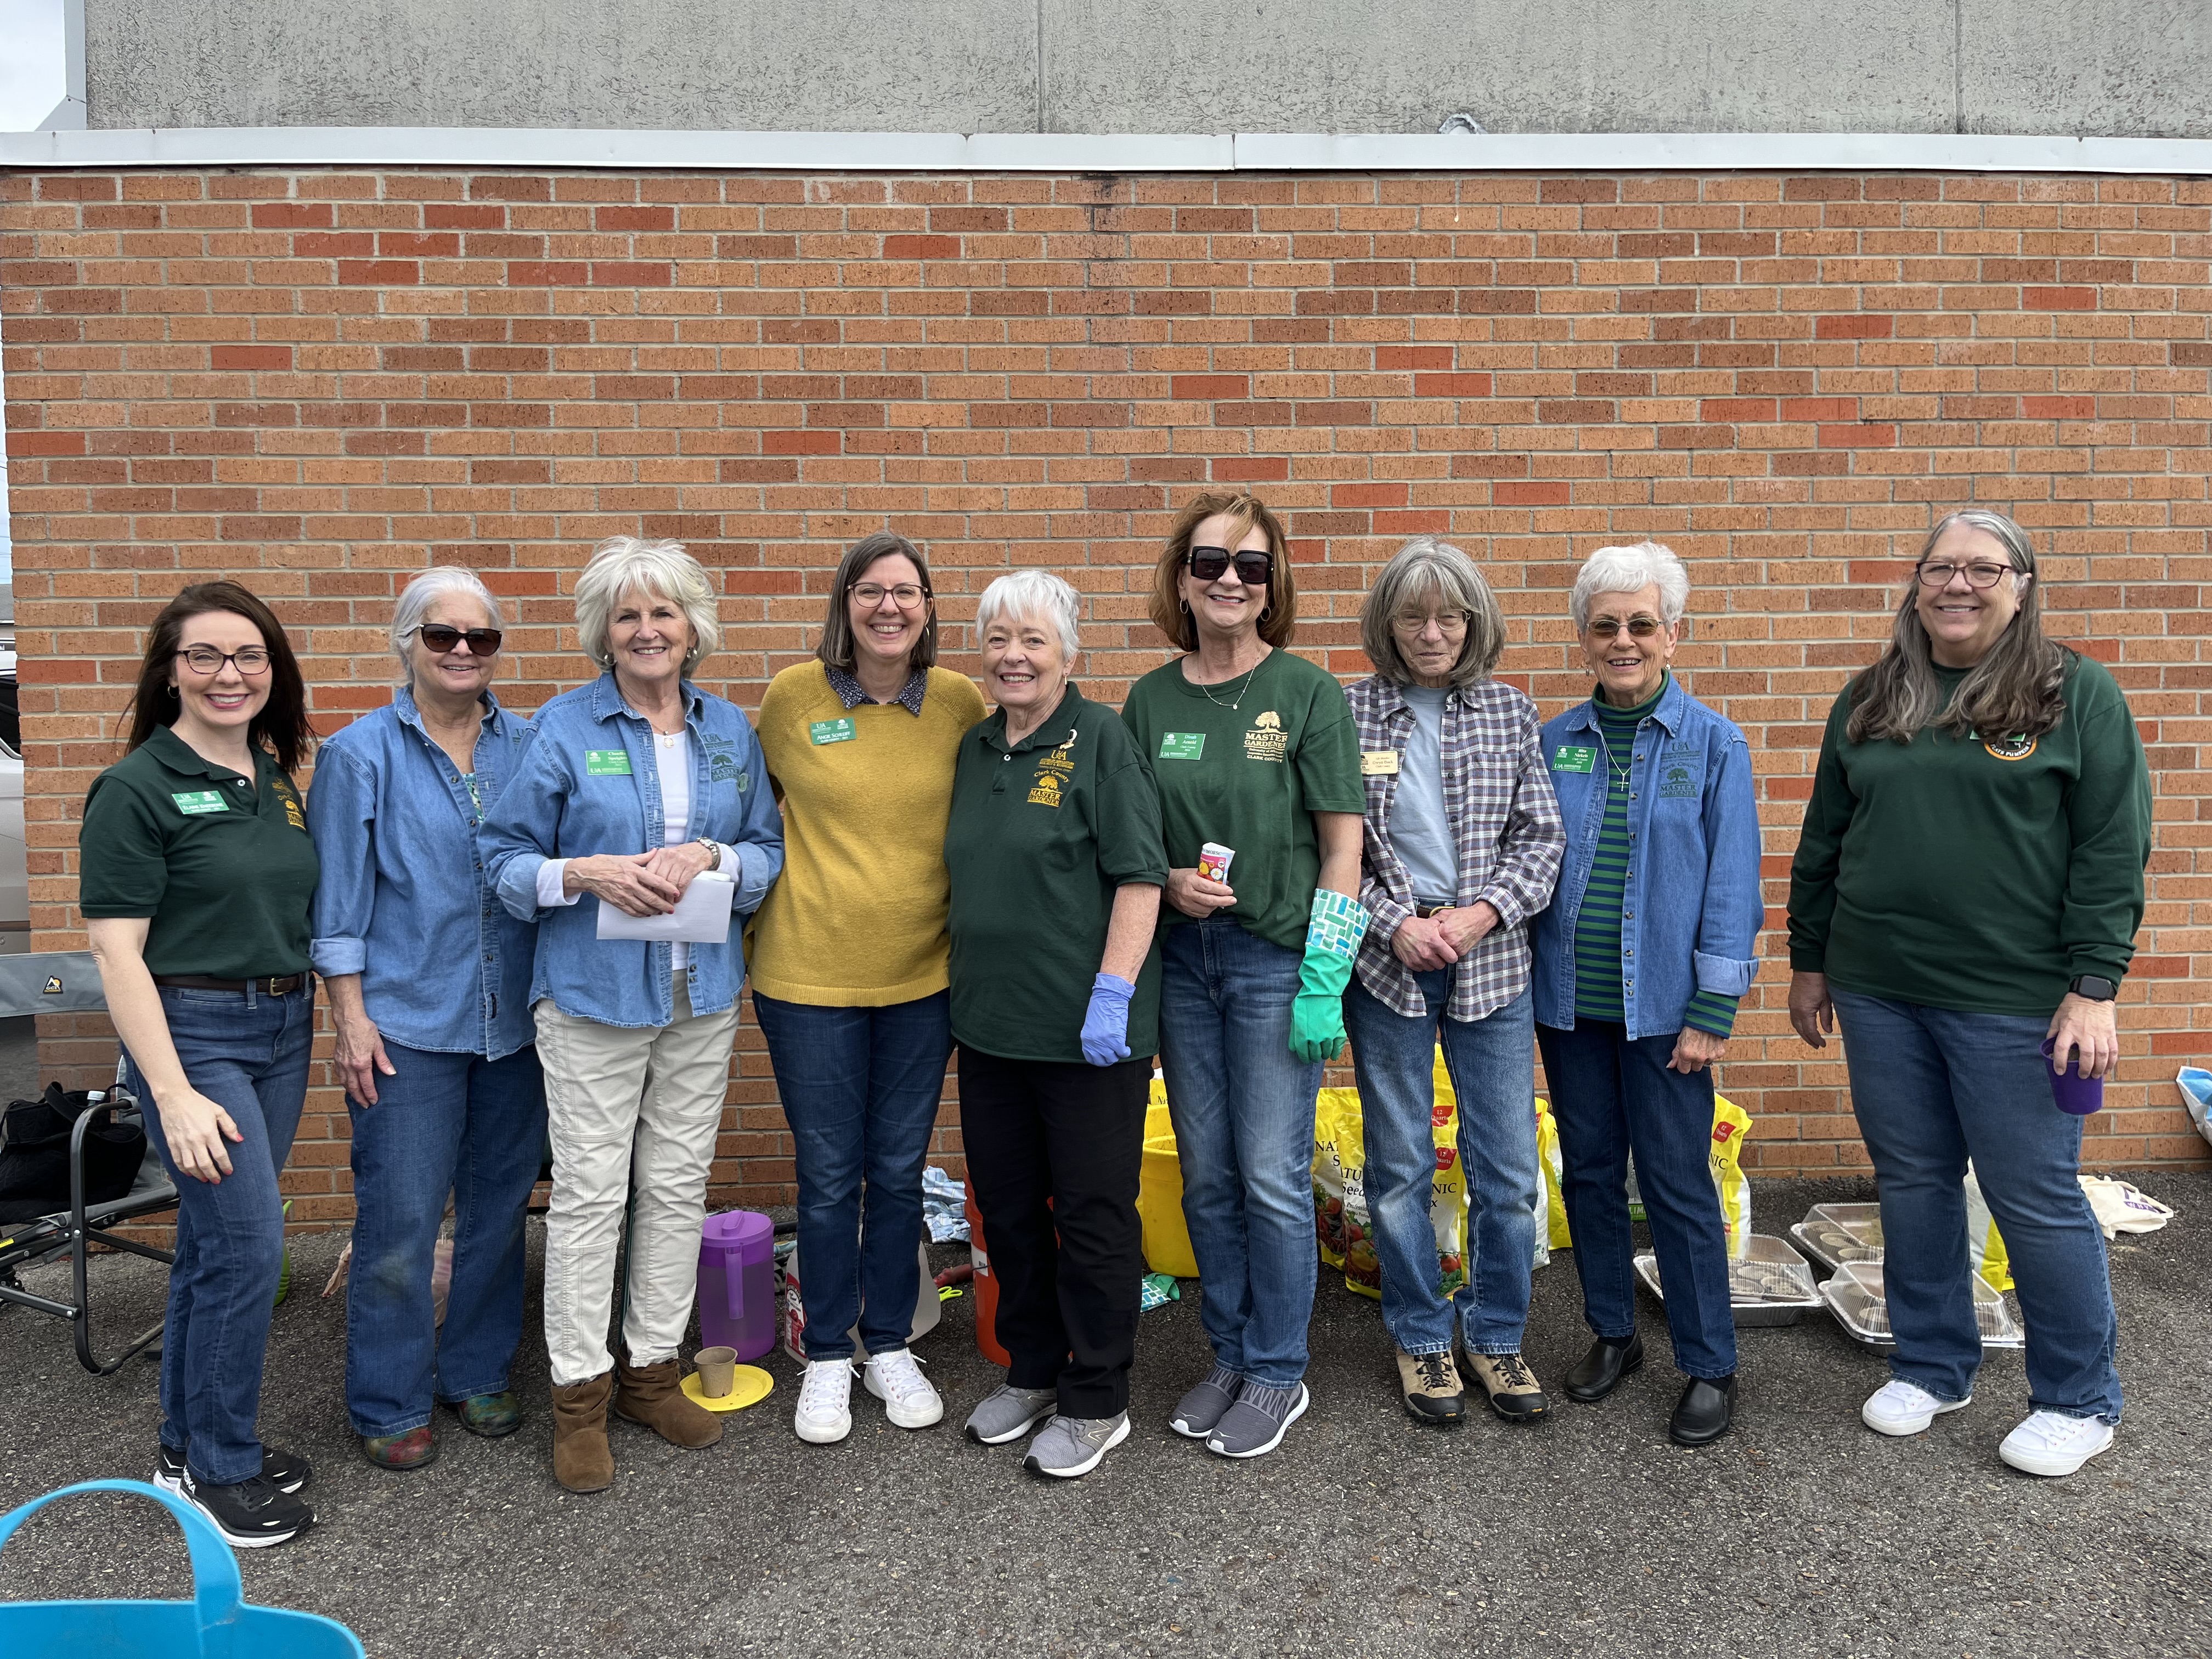 master gardeners smiling for the camera